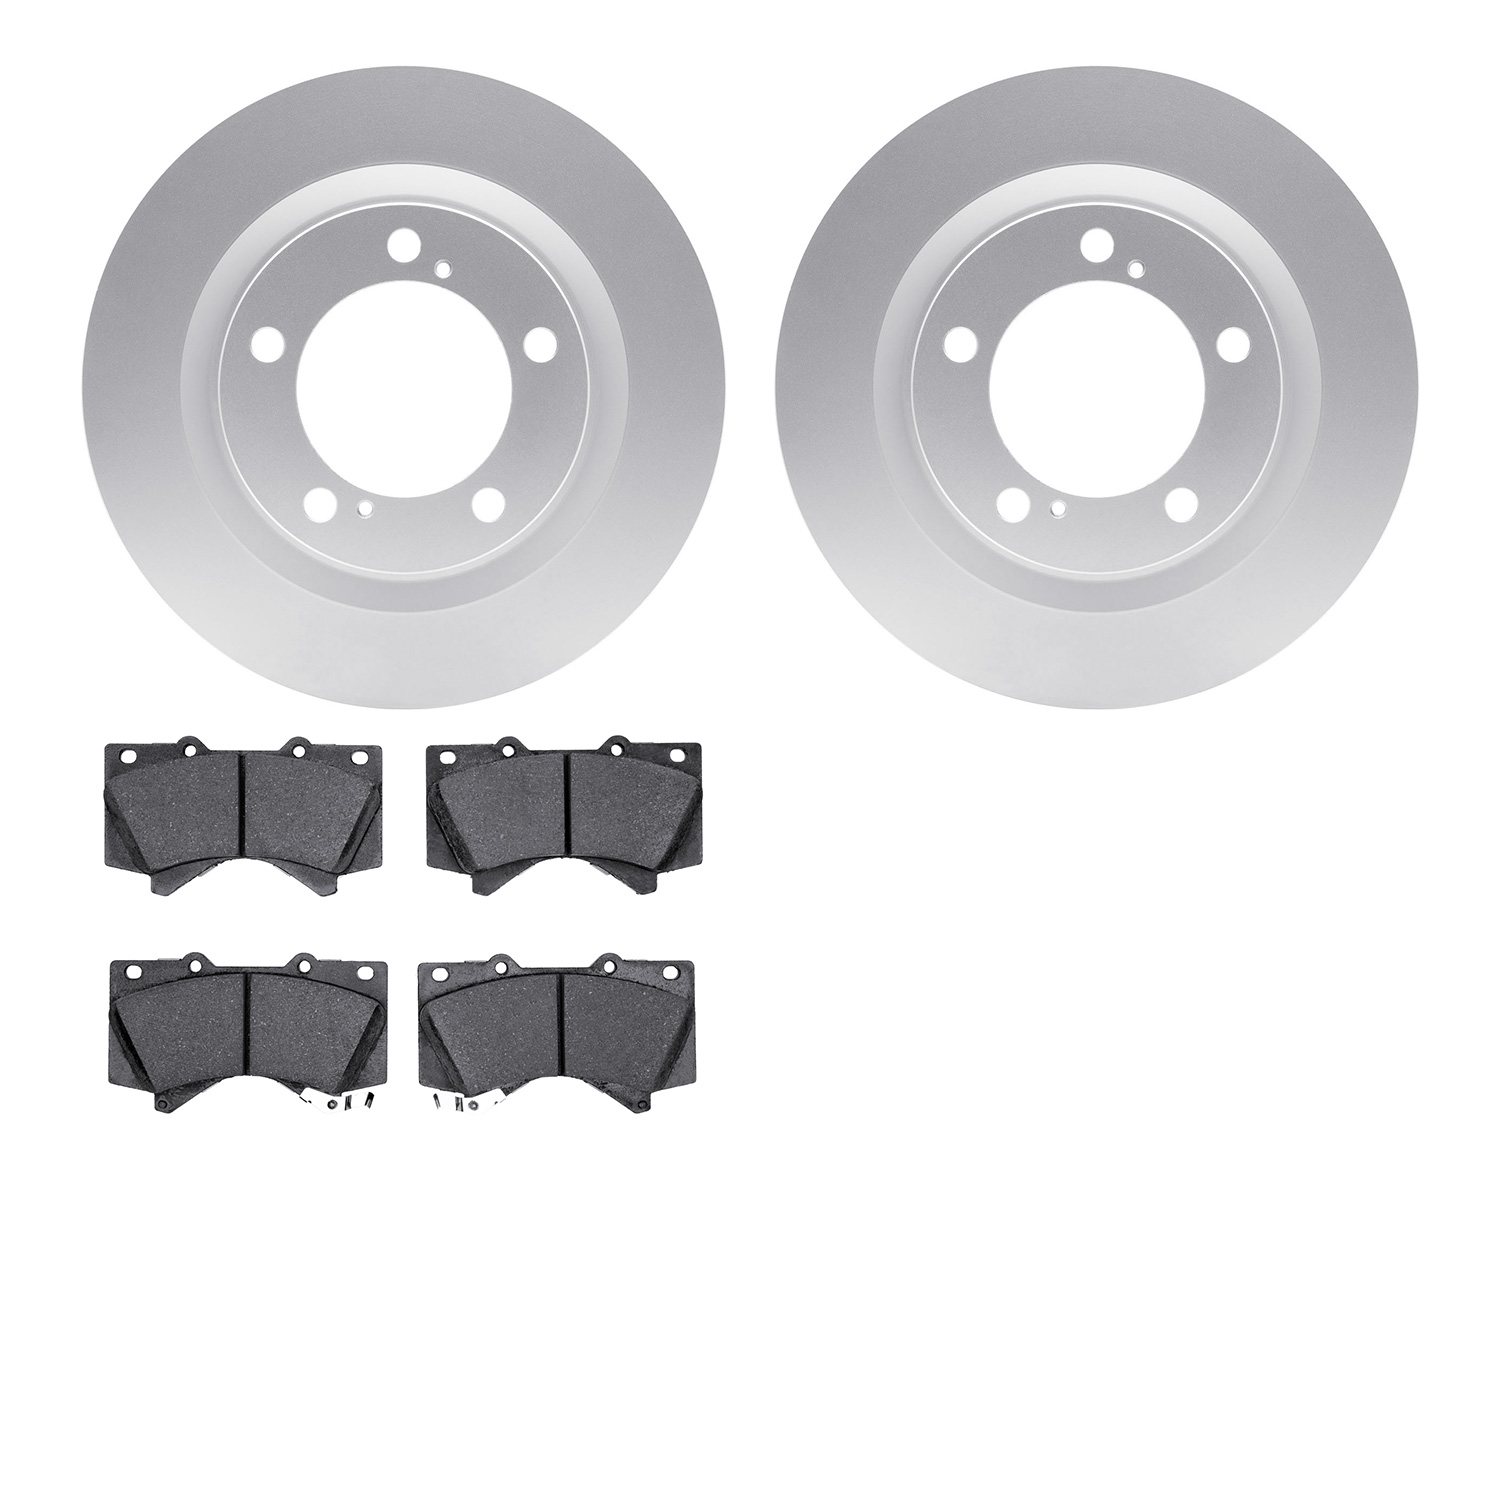 4402-76013 Geospec Brake Rotors with Ultimate-Duty Brake Pads Kit, Fits Select Lexus/Toyota/Scion, Position: Front